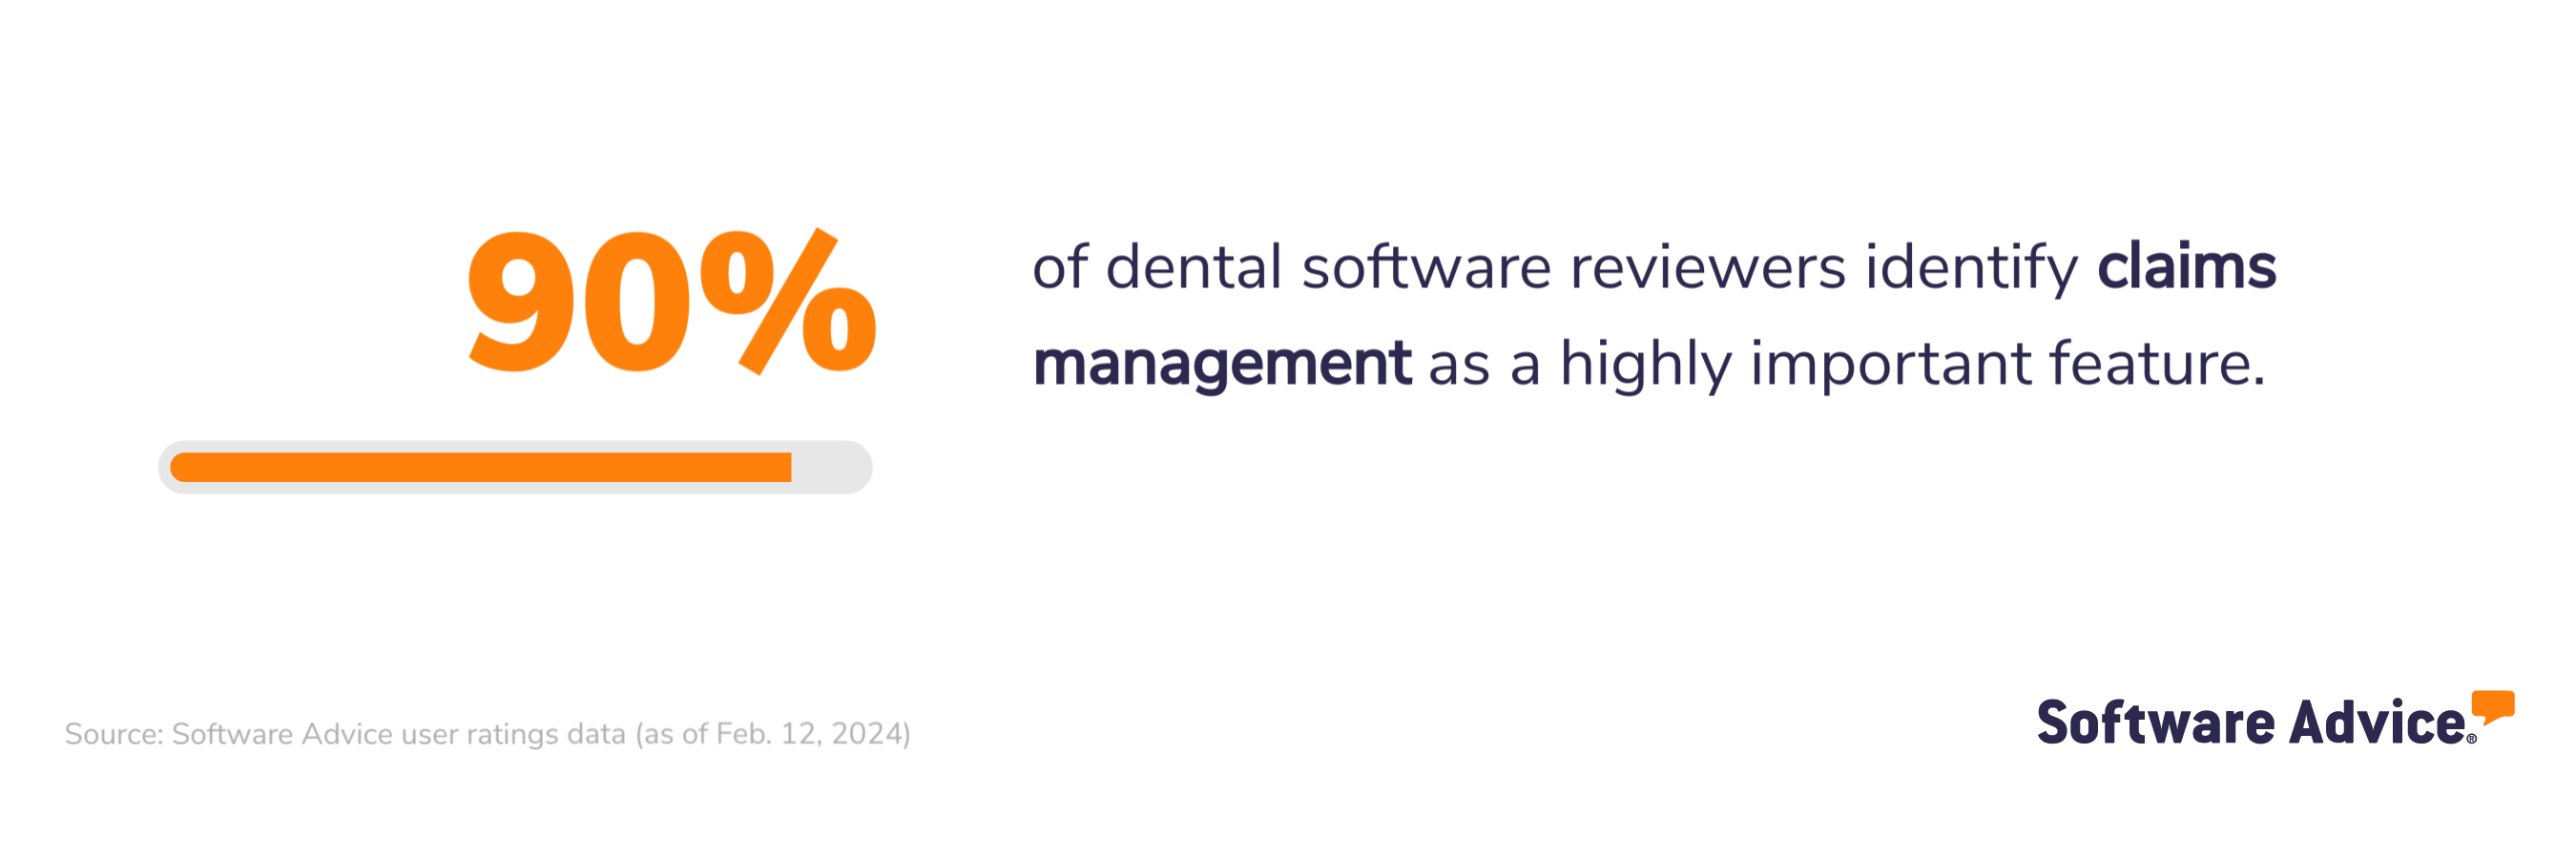 90% of dental software reviewers identify claims management as a highly important feature